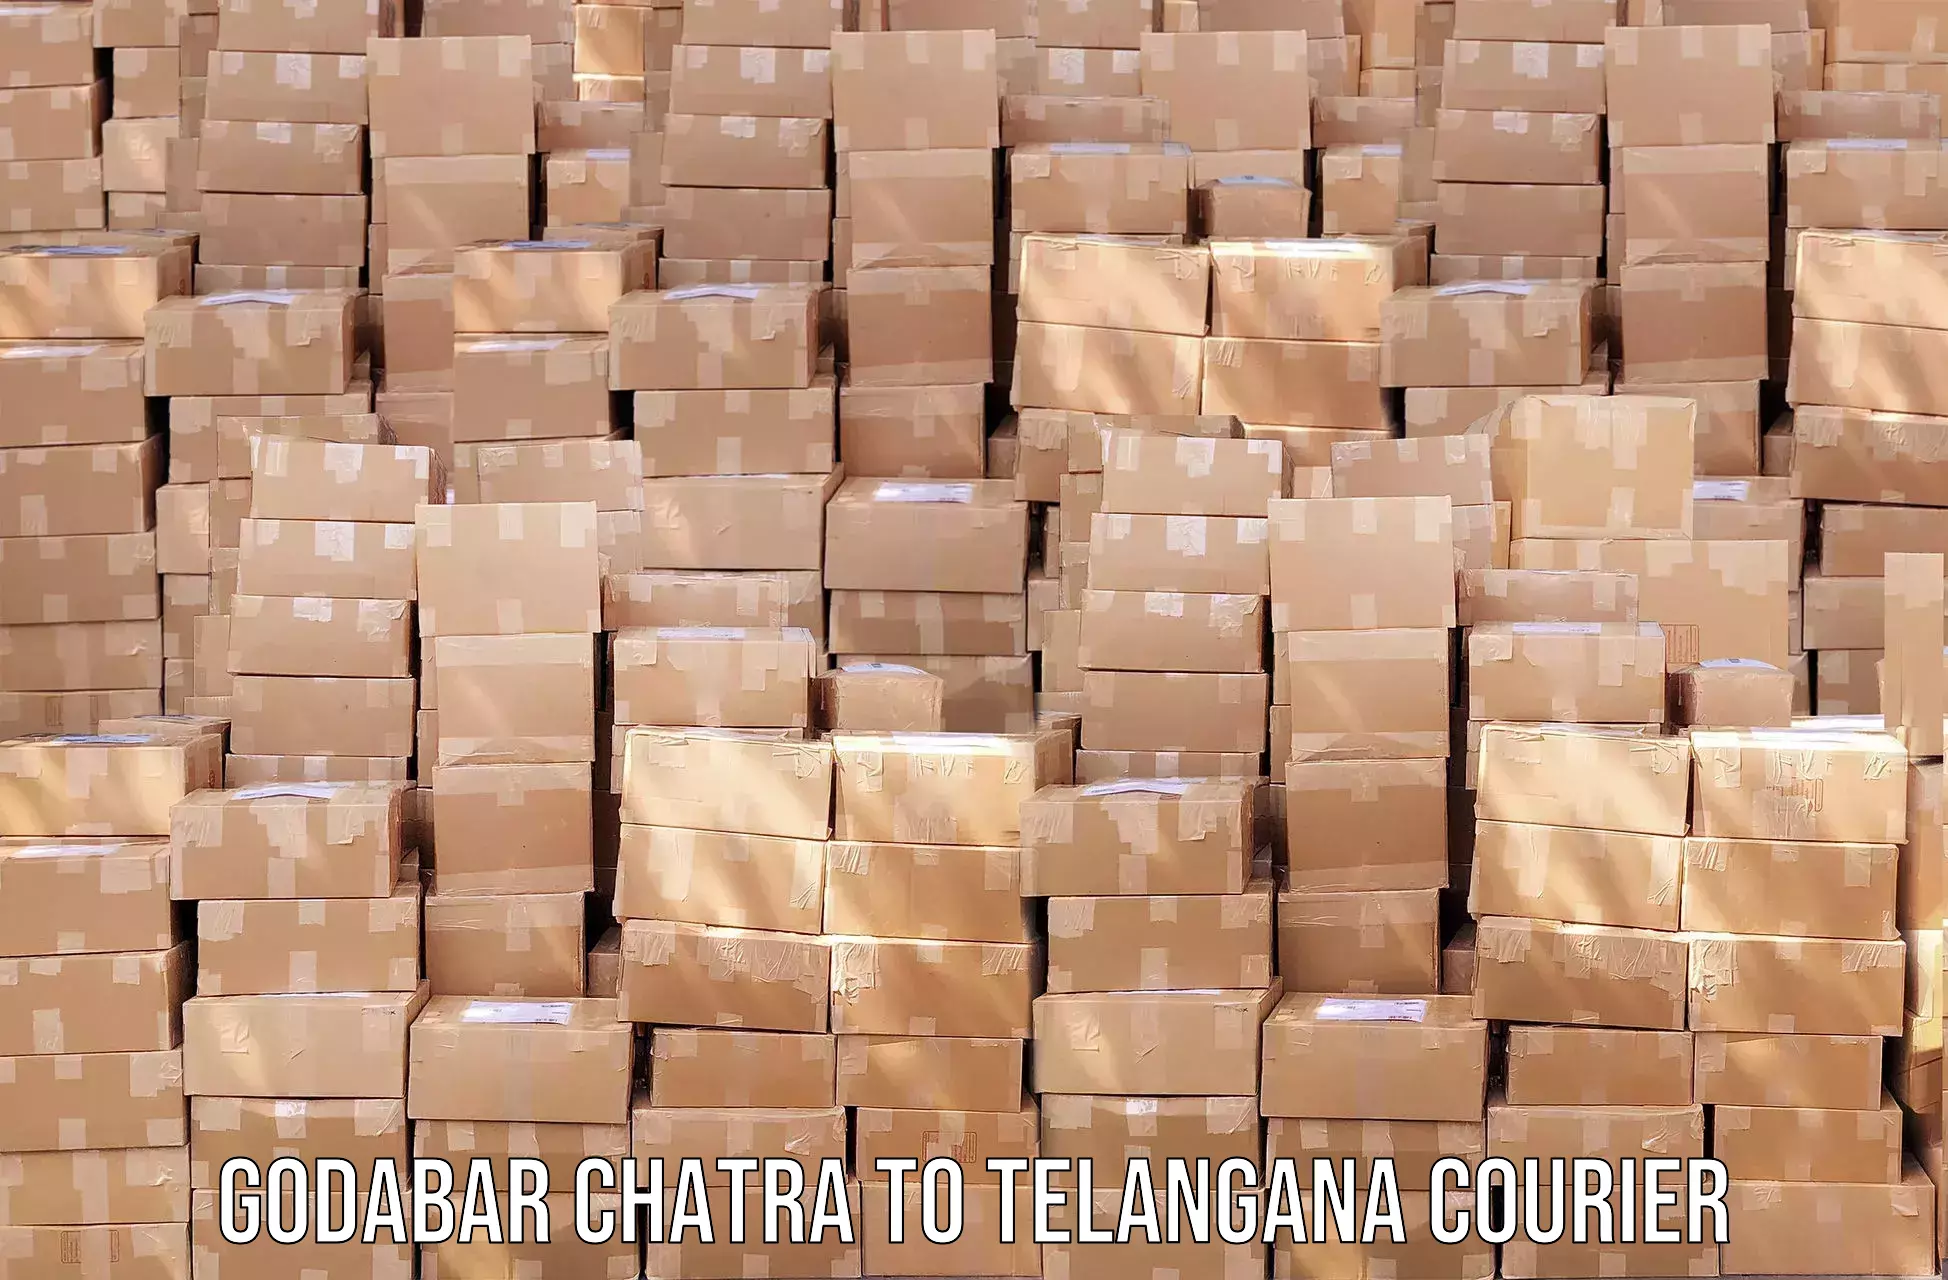 Customer-oriented courier services Godabar Chatra to Rayaparthi